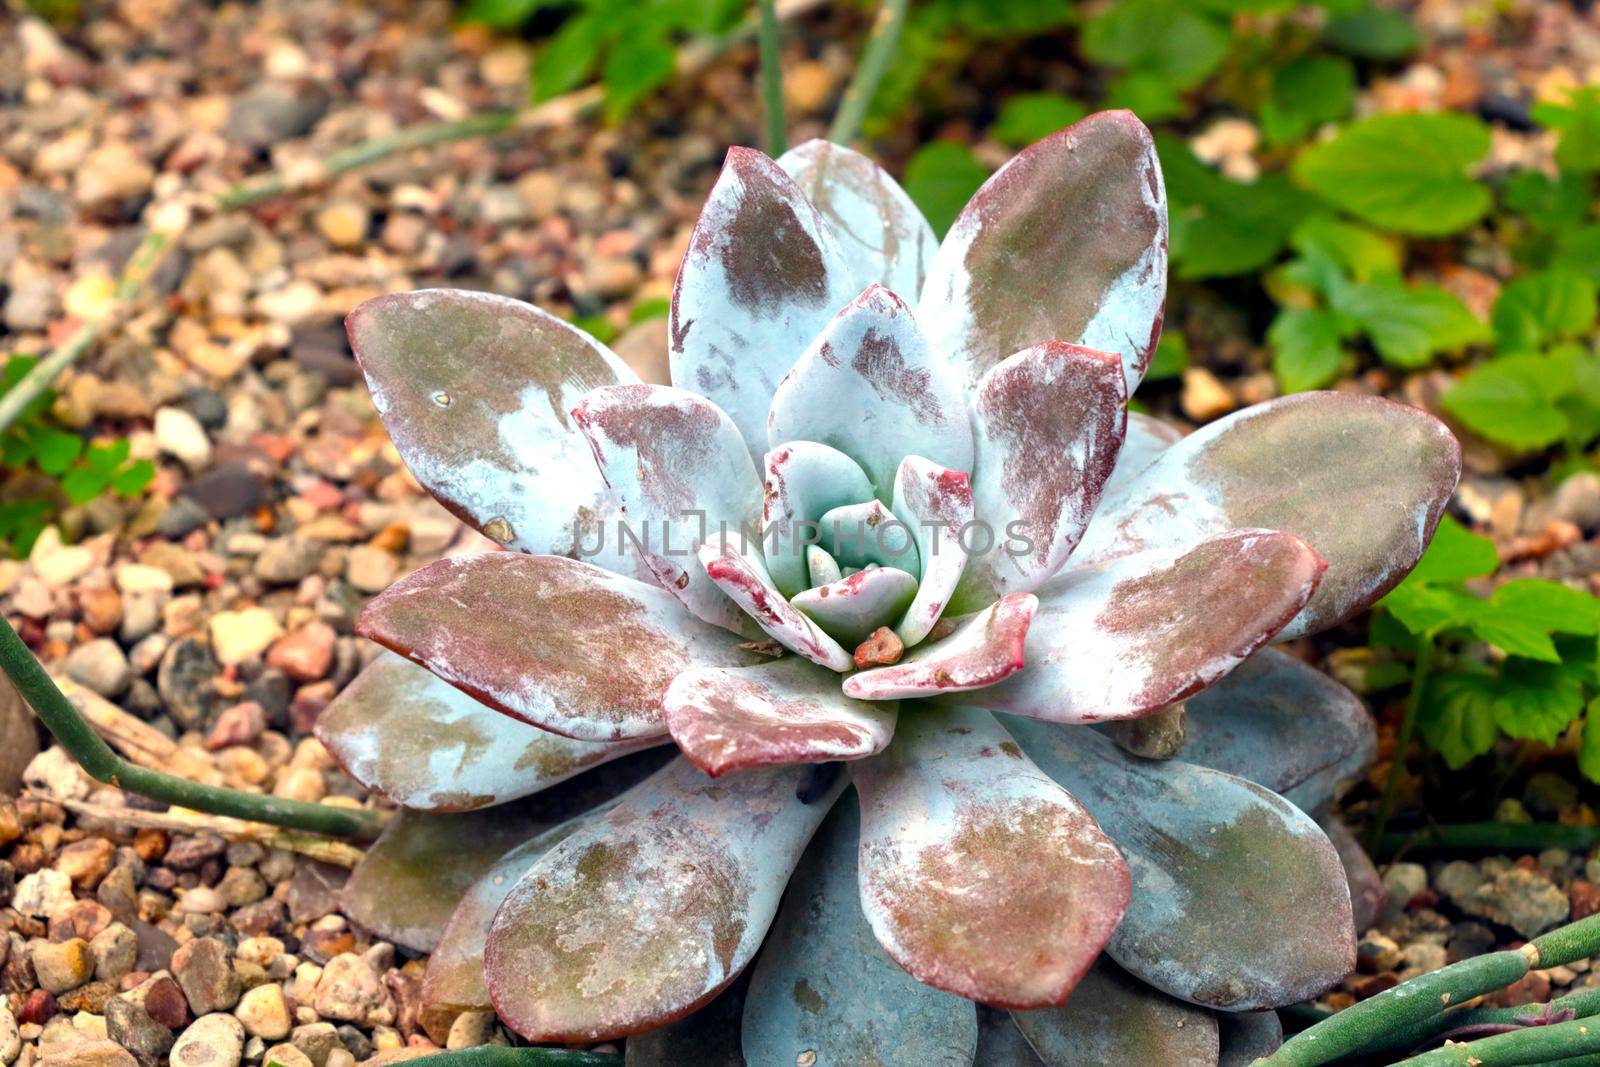 Succulents are plants whose parts are more fleshy than usual. Water retention in arid climates